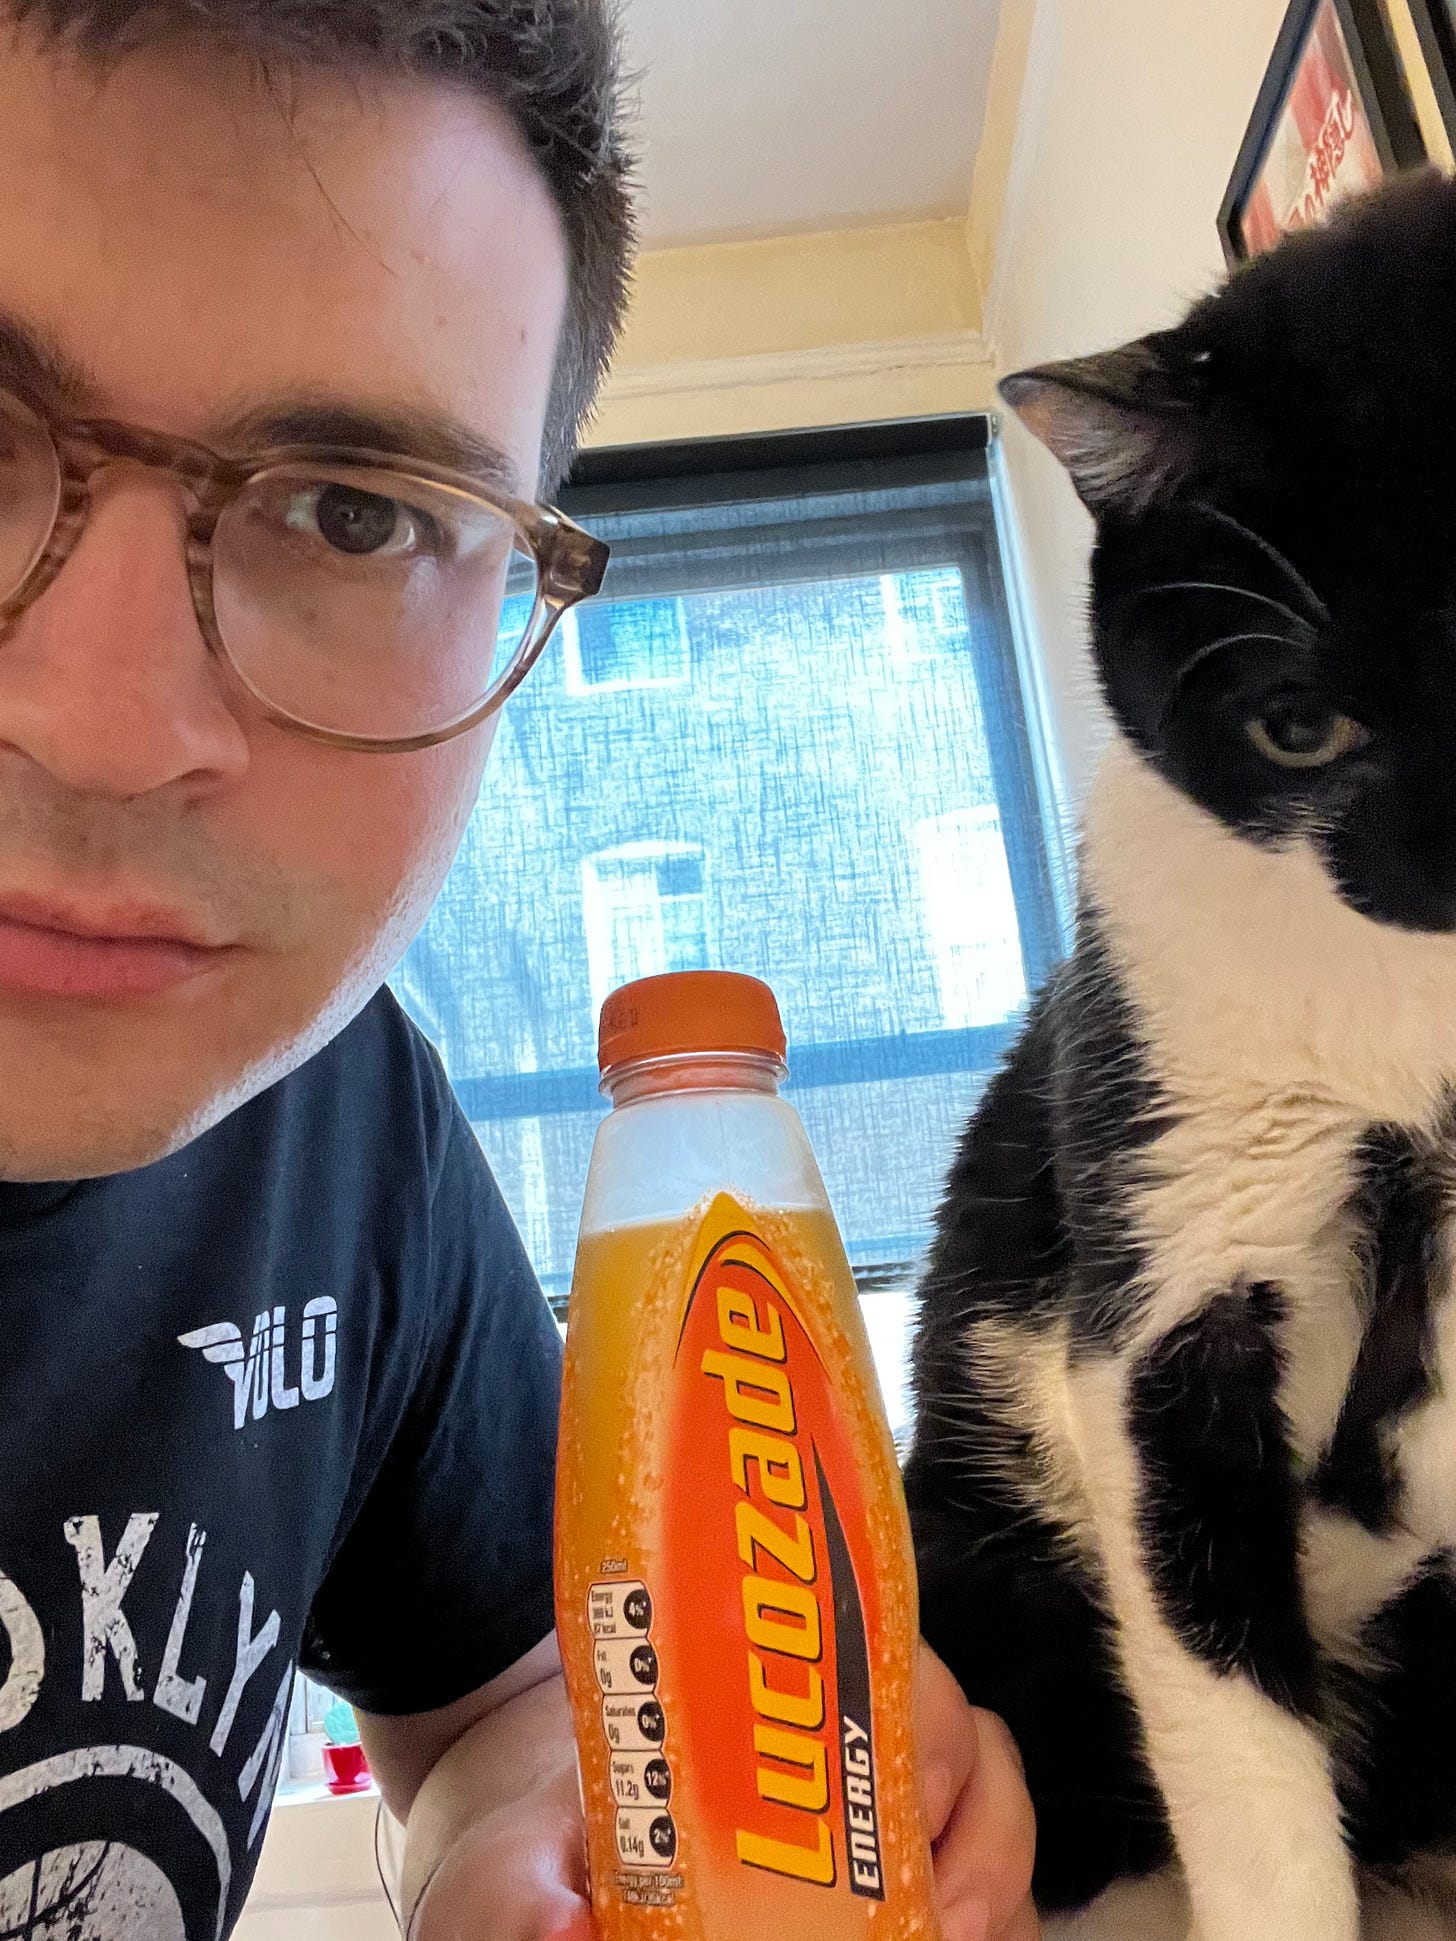 The author and his cat, who is glowering menacingly, hold up a Lucozade Orange.